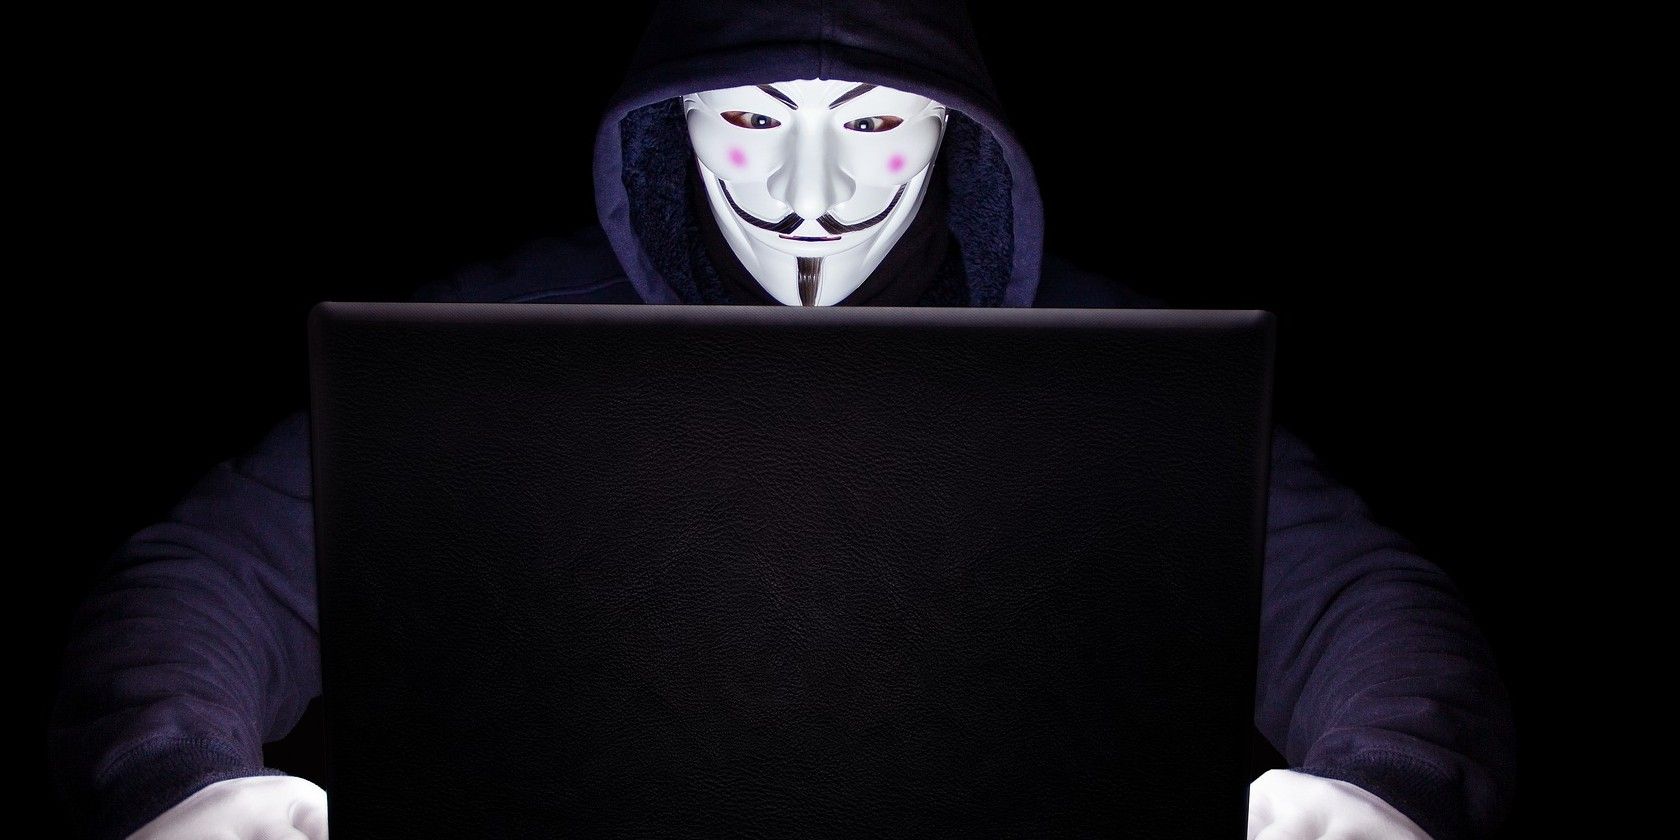 hackers can take over social media accounts